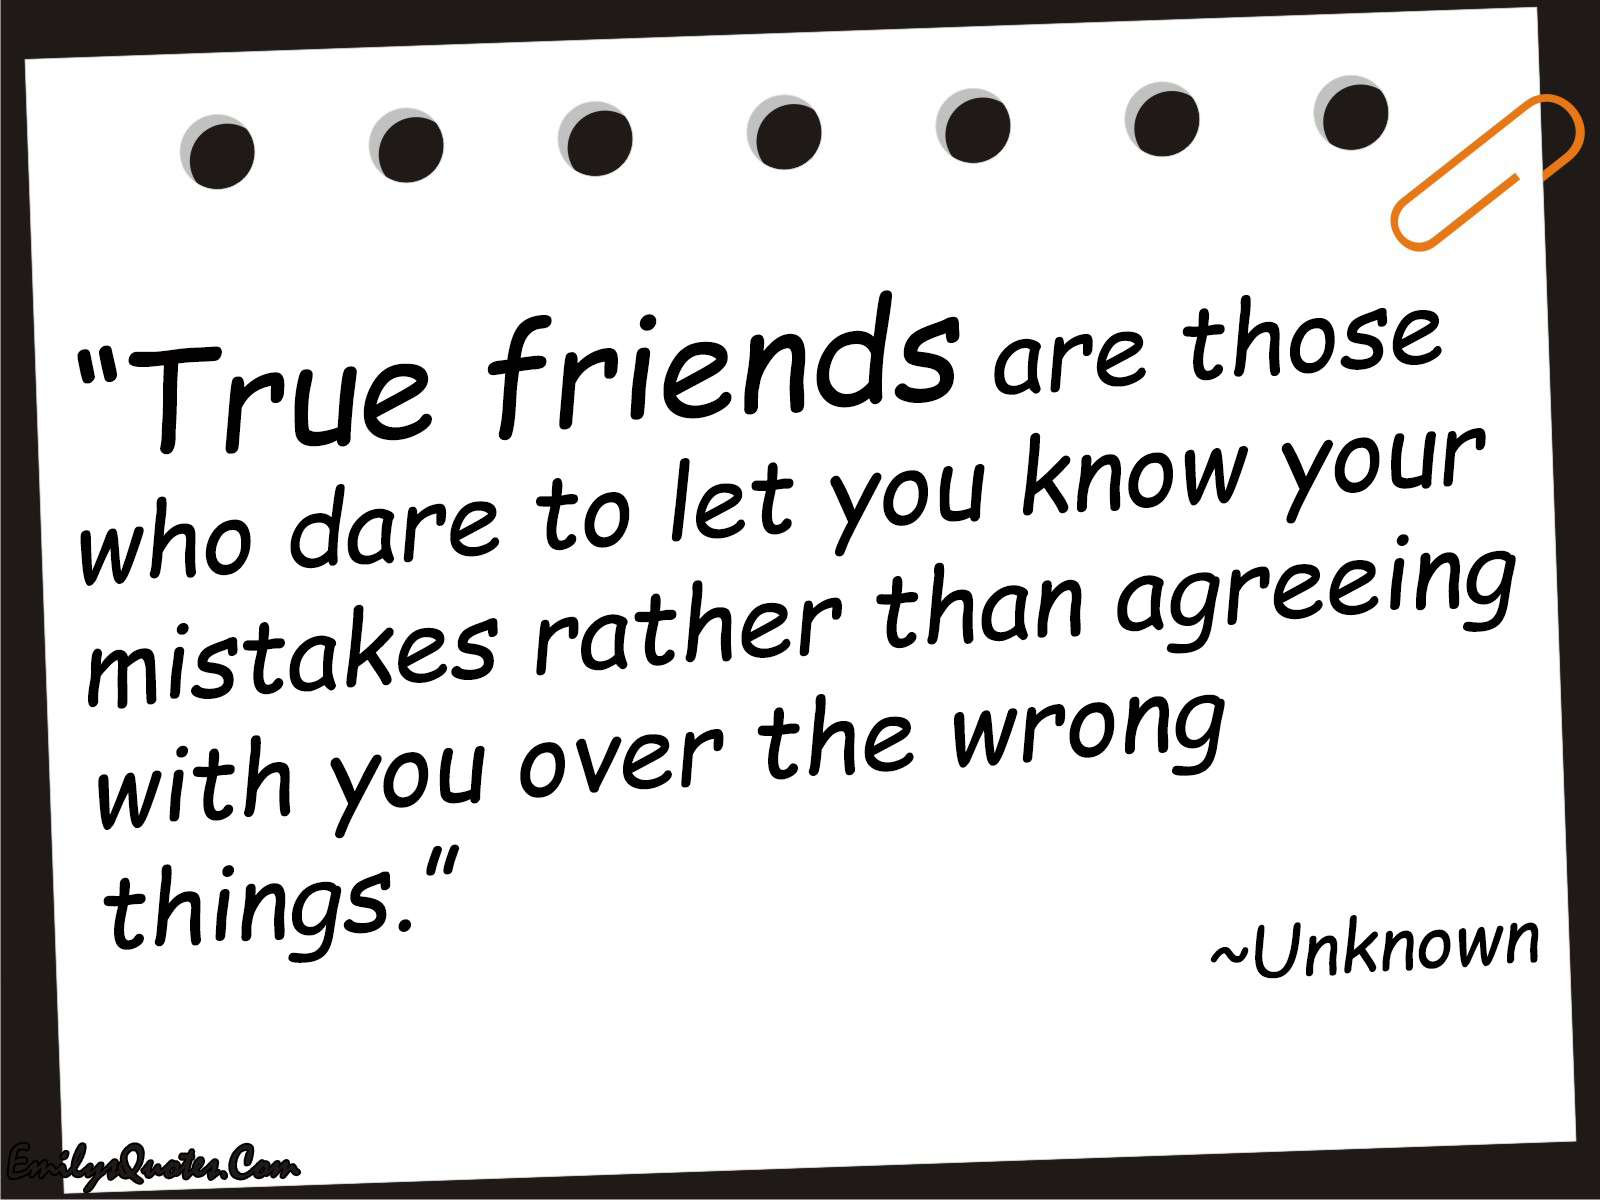 True friends are those who dare to let you know your mistakes rather than agreeing with you over the wrong things